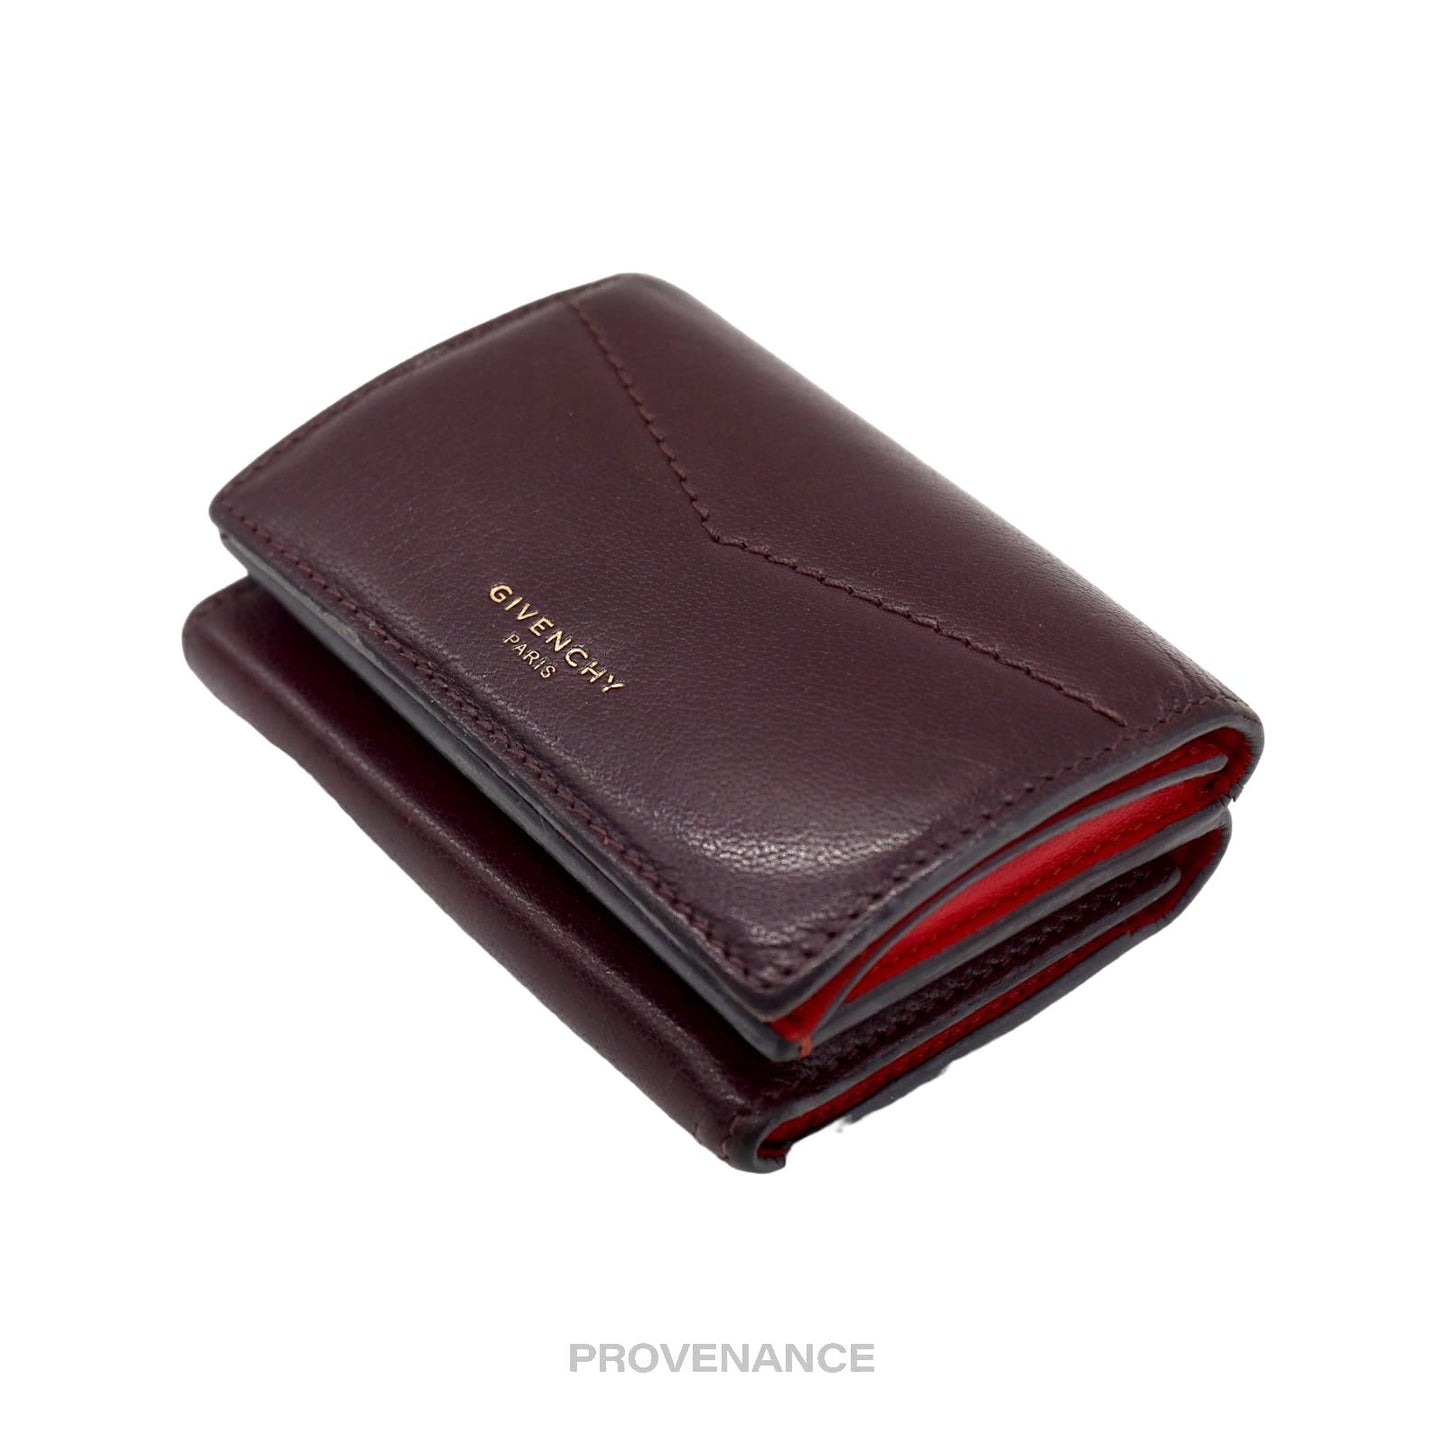 🔴 Givenchy Two Tone Trifold Wallet - Burgundy Leather